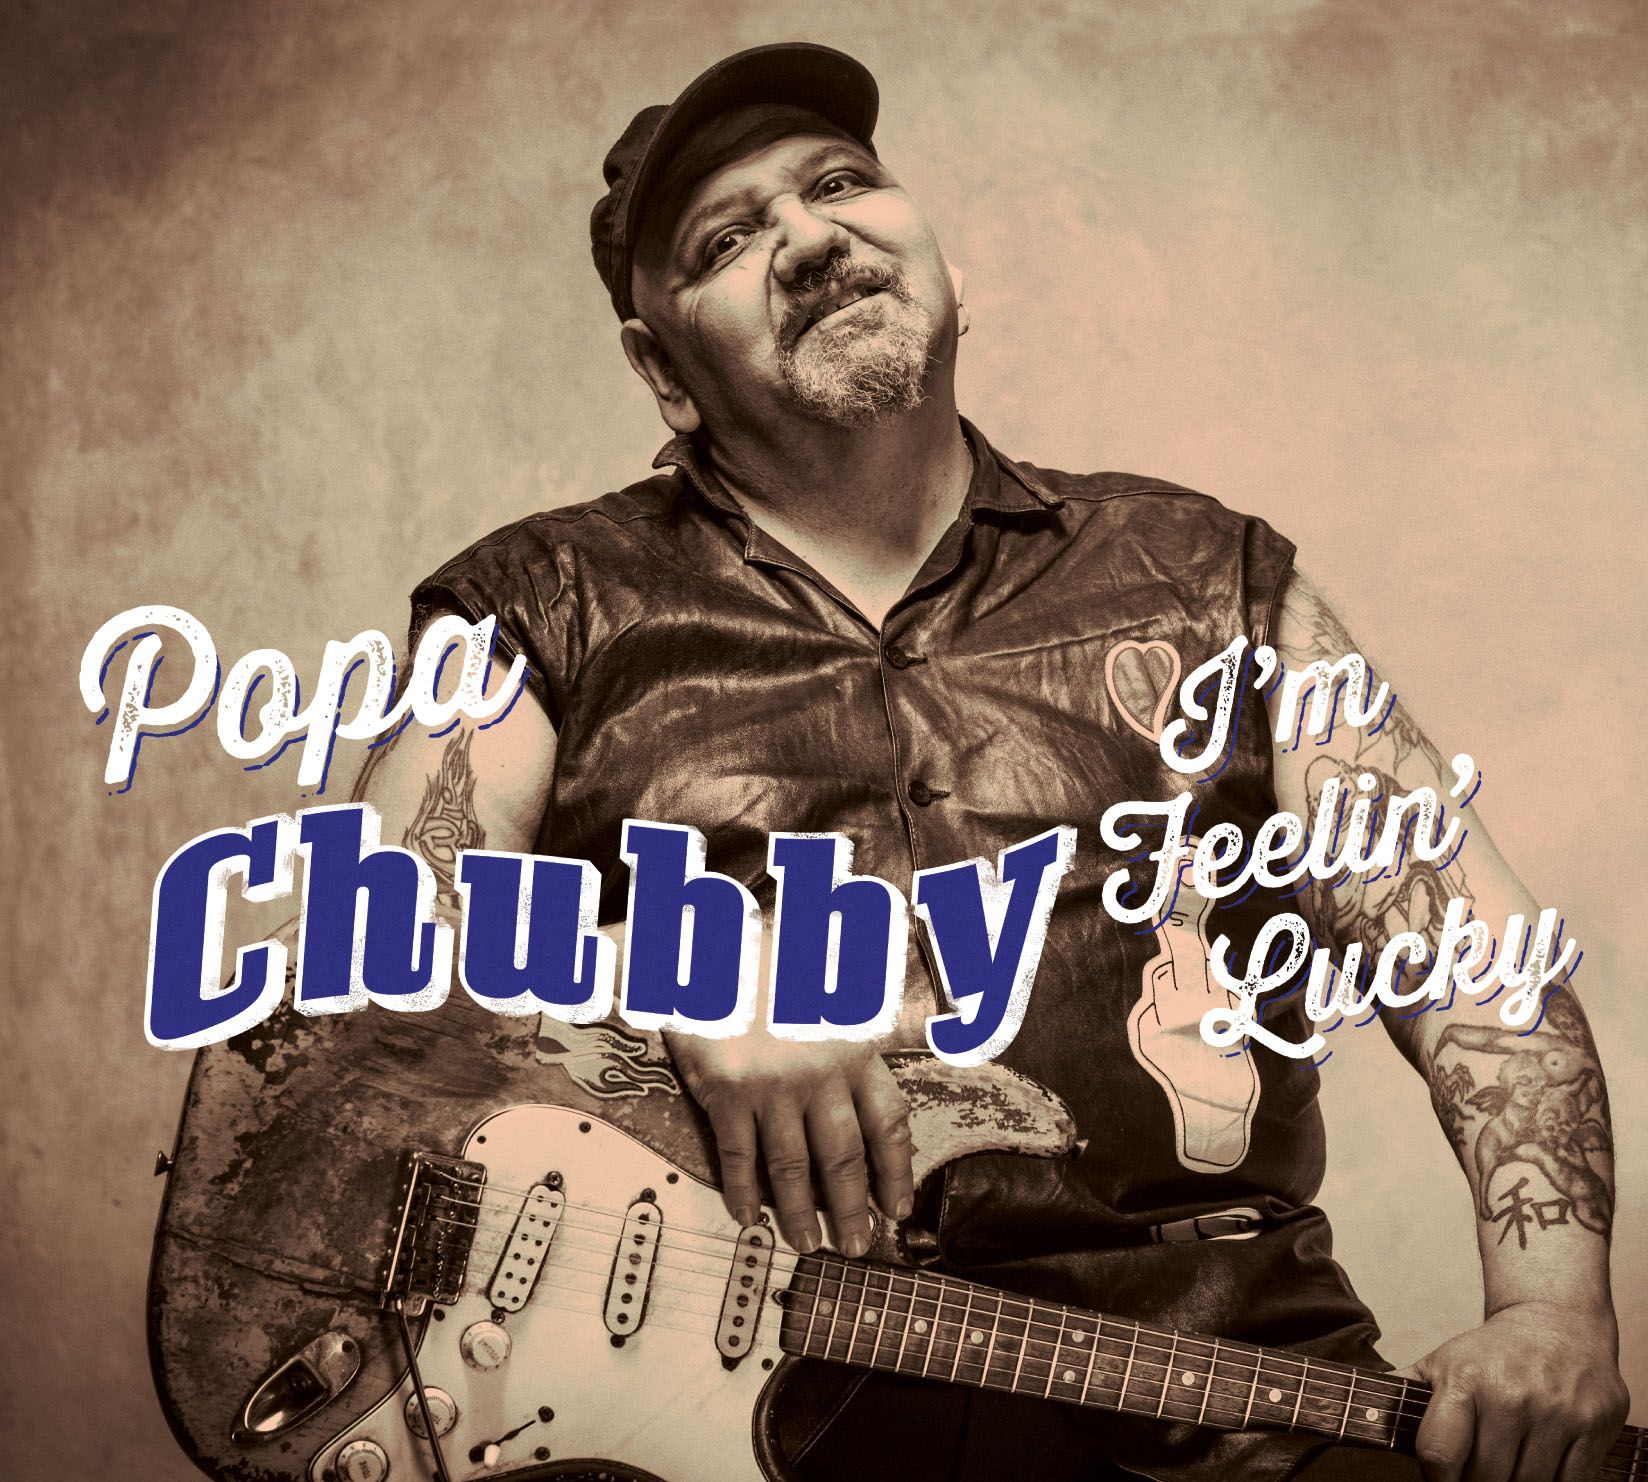 Cricket reccomend Popa chubby band